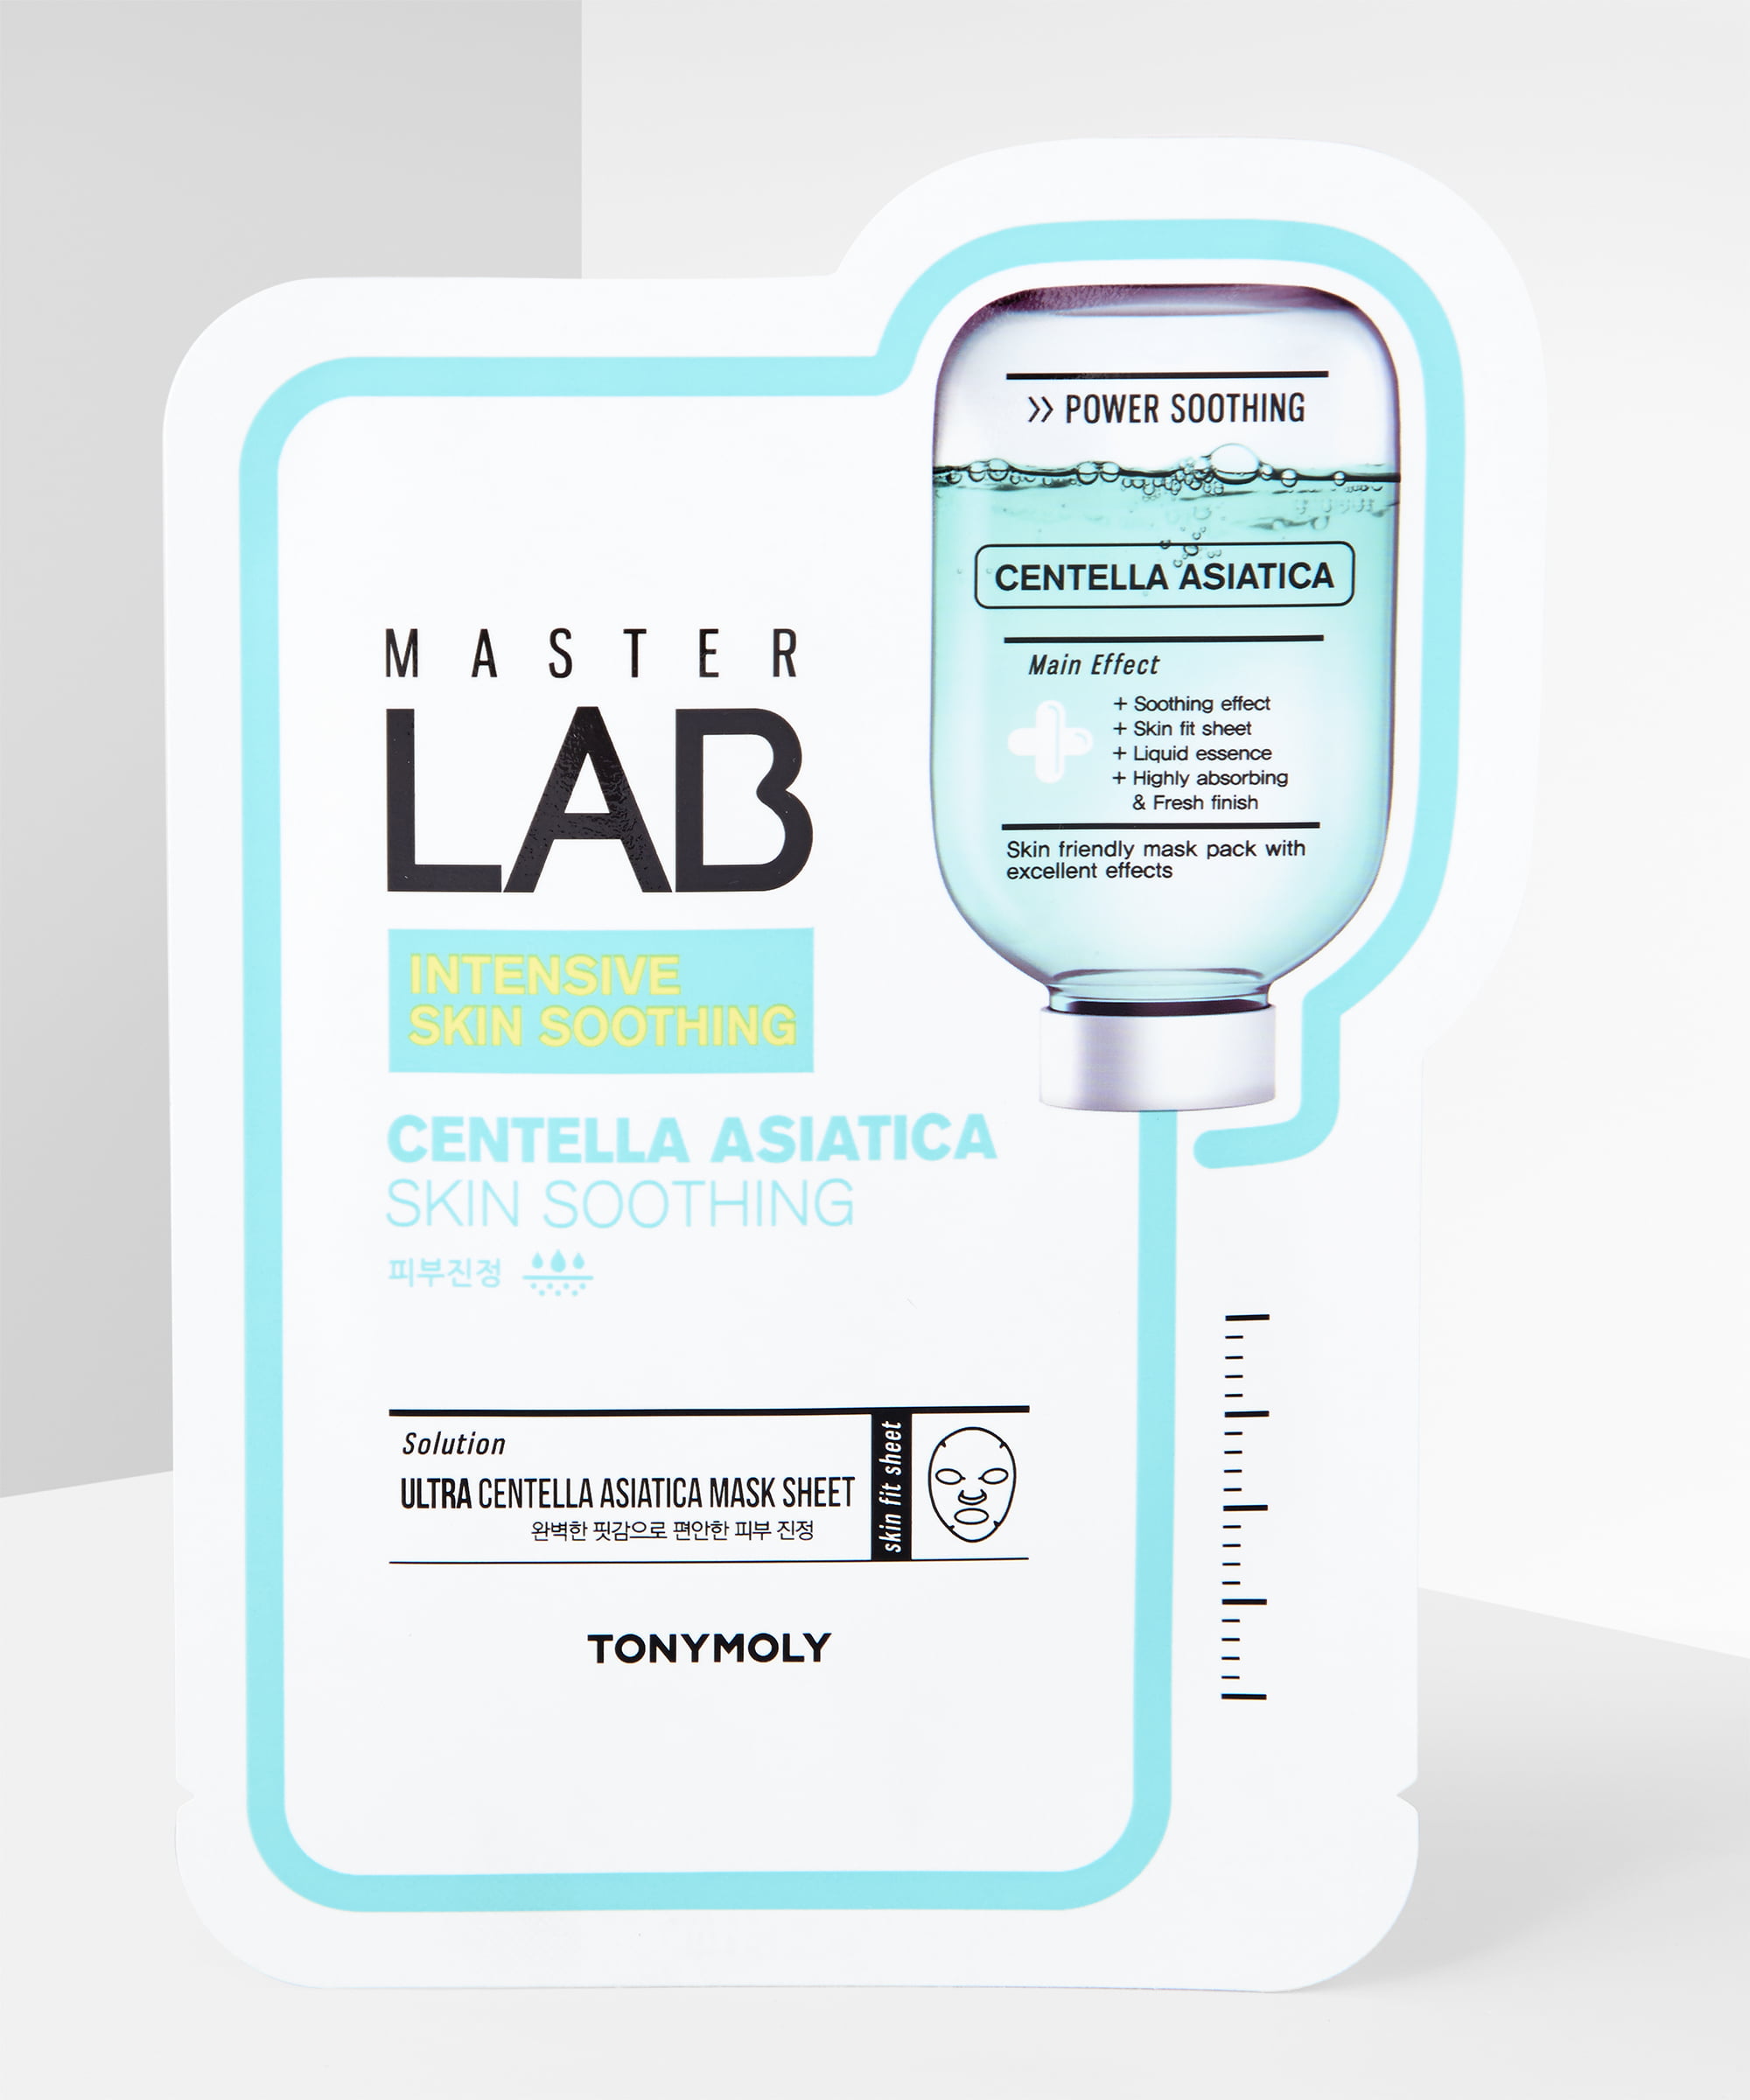 Master Lab Centella Asiatica Intensive Soothing Care, 19g | Tonymoly my-k.ro/ imagine noua